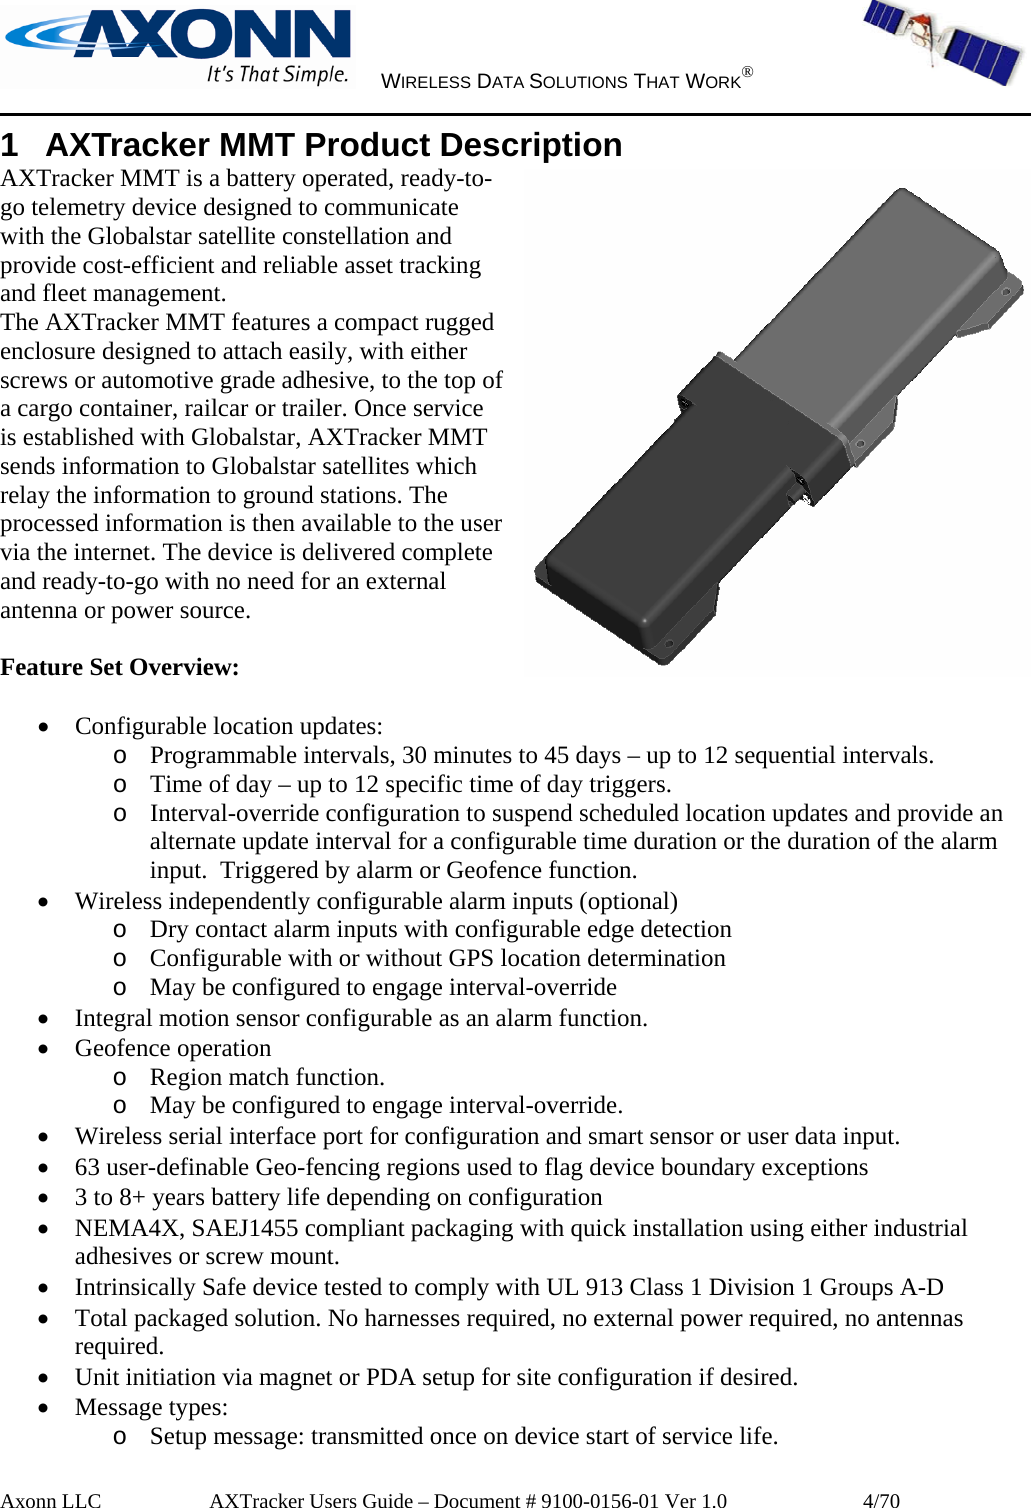     WIRELESS DATA SOLUTIONS THAT WORK®   Axonn LLC         AXTracker Users Guide – Document # 9100-0156-01 Ver 1.0                  4/70 1  AXTracker MMT Product Description AXTracker MMT is a battery operated, ready-to-go telemetry device designed to communicate with the Globalstar satellite constellation and provide cost-efficient and reliable asset tracking and fleet management.  The AXTracker MMT features a compact rugged enclosure designed to attach easily, with either screws or automotive grade adhesive, to the top of a cargo container, railcar or trailer. Once service is established with Globalstar, AXTracker MMT sends information to Globalstar satellites which relay the information to ground stations. The processed information is then available to the user via the internet. The device is delivered complete and ready-to-go with no need for an external antenna or power source.  Feature Set Overview:  • Configurable location updates: o Programmable intervals, 30 minutes to 45 days – up to 12 sequential intervals. o Time of day – up to 12 specific time of day triggers. o Interval-override configuration to suspend scheduled location updates and provide an alternate update interval for a configurable time duration or the duration of the alarm input.  Triggered by alarm or Geofence function. • Wireless independently configurable alarm inputs (optional) o Dry contact alarm inputs with configurable edge detection o Configurable with or without GPS location determination o May be configured to engage interval-override • Integral motion sensor configurable as an alarm function. • Geofence operation o Region match function. o May be configured to engage interval-override. • Wireless serial interface port for configuration and smart sensor or user data input. • 63 user-definable Geo-fencing regions used to flag device boundary exceptions • 3 to 8+ years battery life depending on configuration • NEMA4X, SAEJ1455 compliant packaging with quick installation using either industrial adhesives or screw mount. • Intrinsically Safe device tested to comply with UL 913 Class 1 Division 1 Groups A-D • Total packaged solution. No harnesses required, no external power required, no antennas required. • Unit initiation via magnet or PDA setup for site configuration if desired. • Message types: o Setup message: transmitted once on device start of service life. 